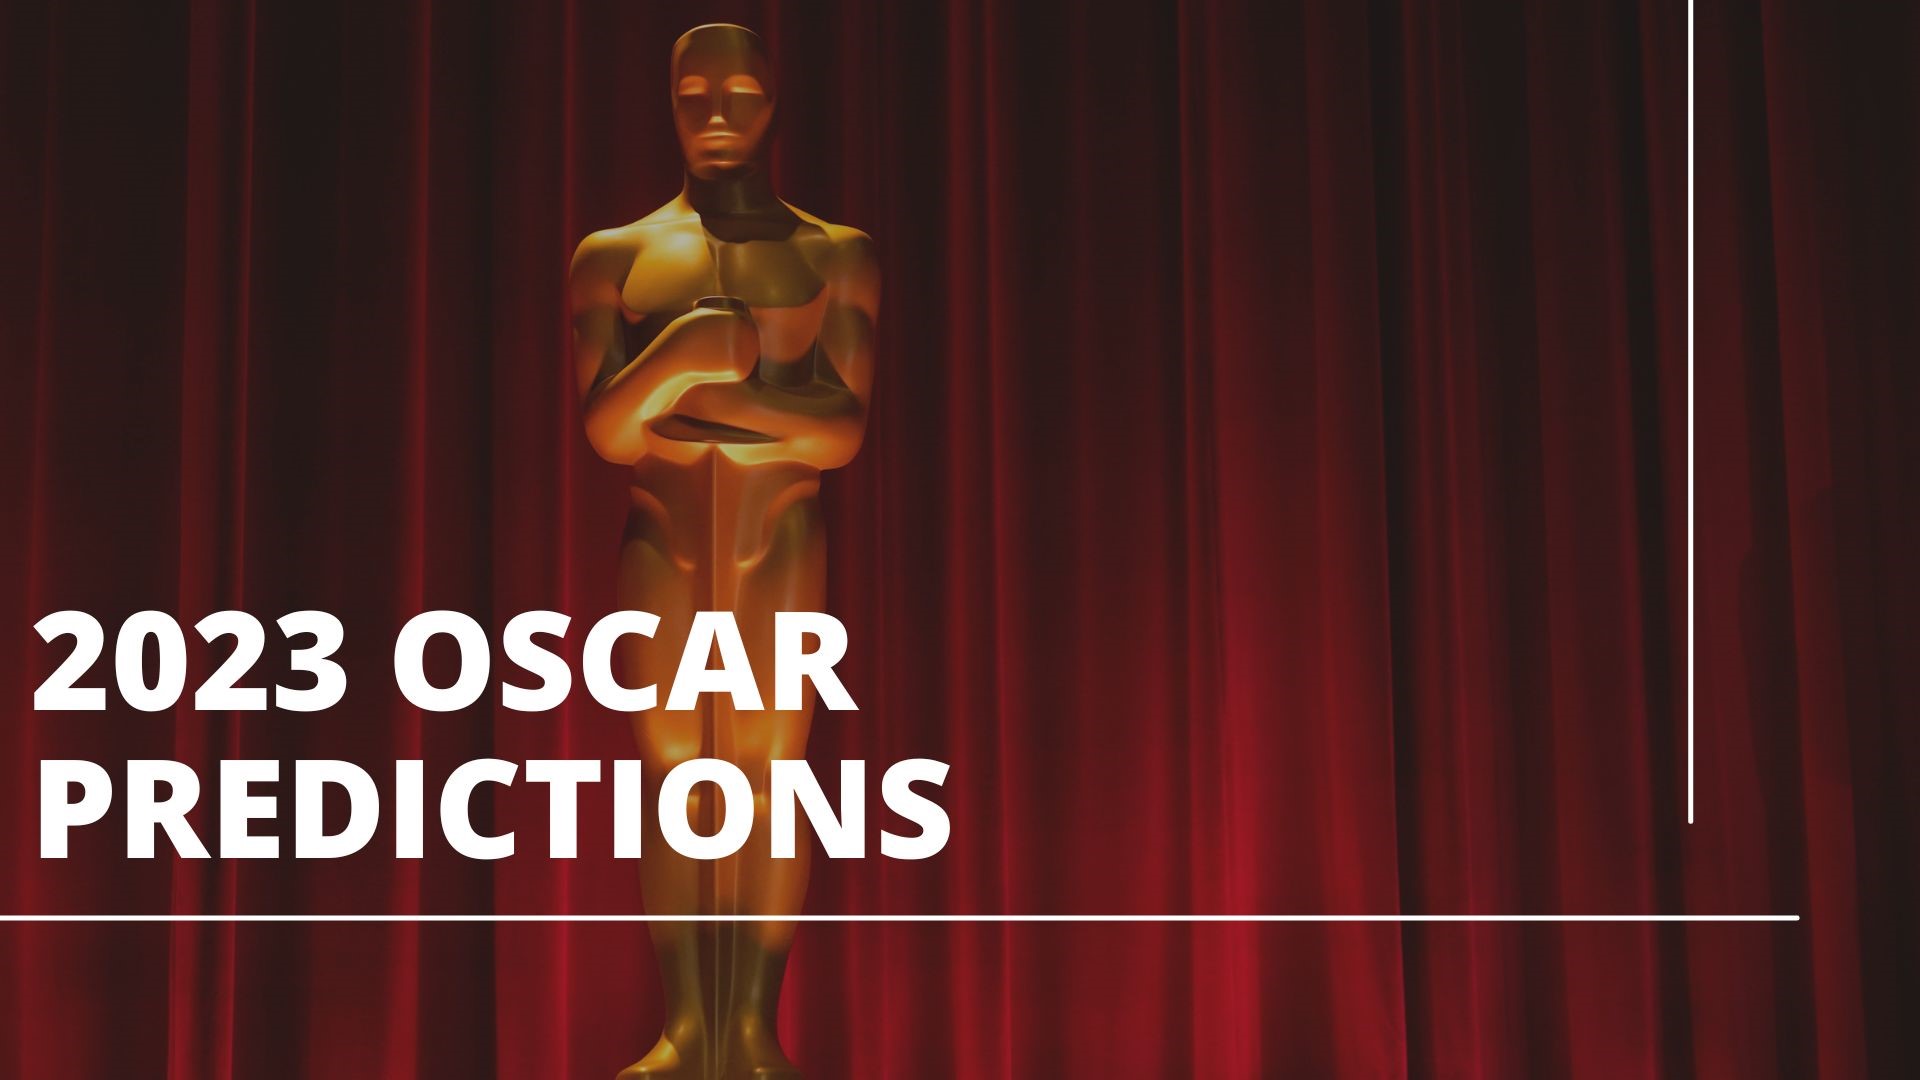 Three movie reviewers with KTHV give their picks for the biggest awards at the 2023 Oscars, from best director to best picture. Their picks and top snubs.